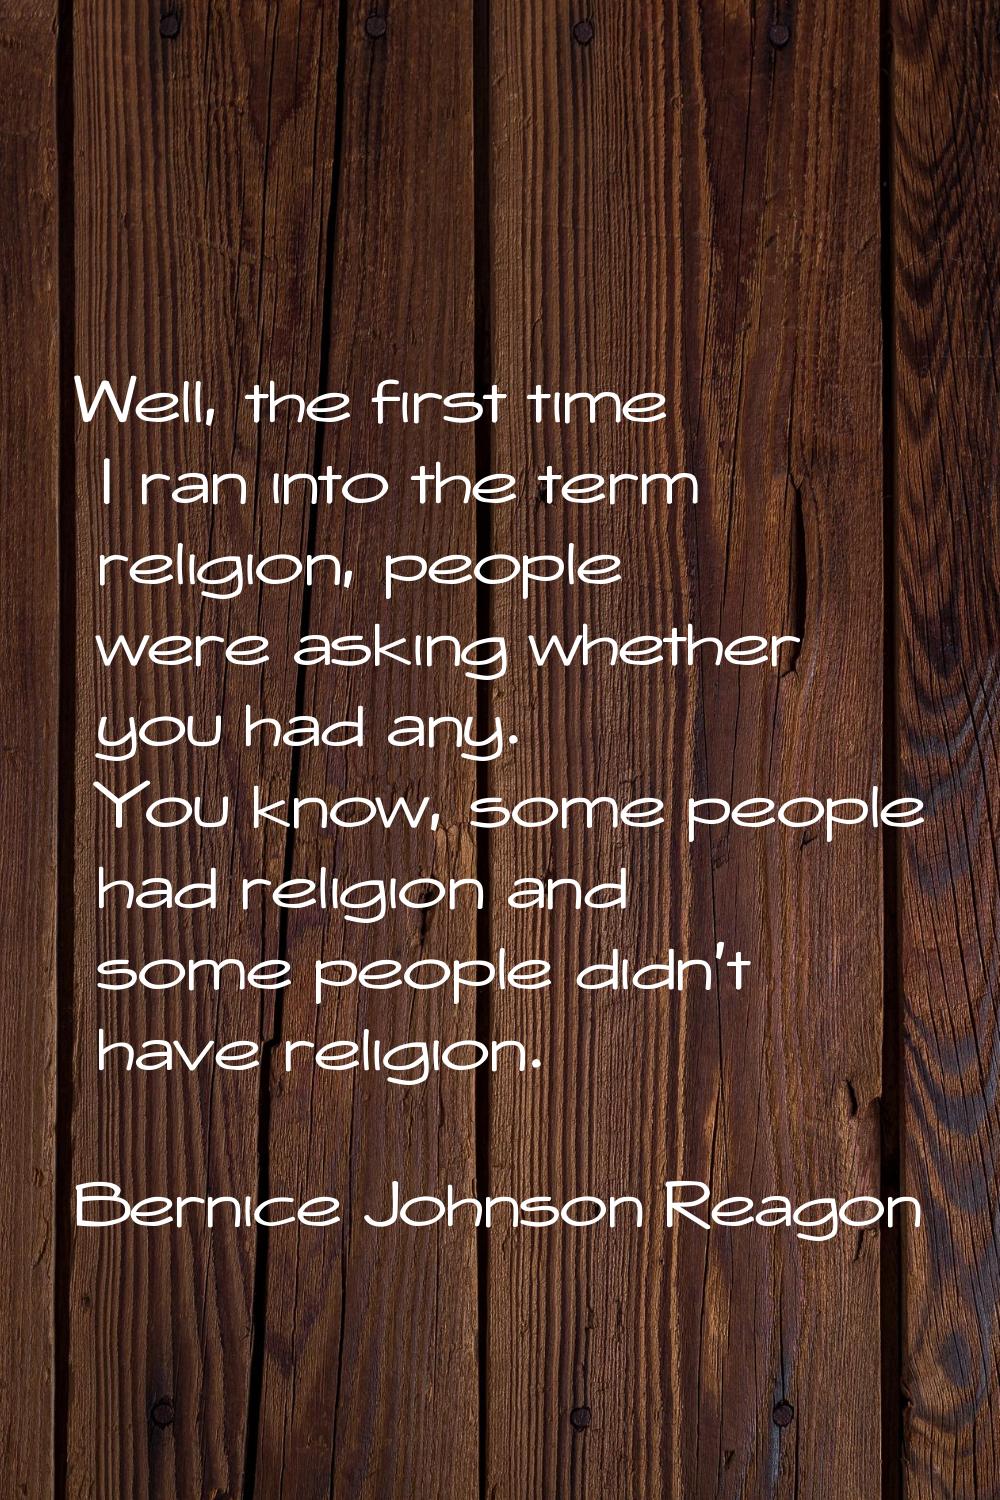 Well, the first time I ran into the term religion, people were asking whether you had any. You know